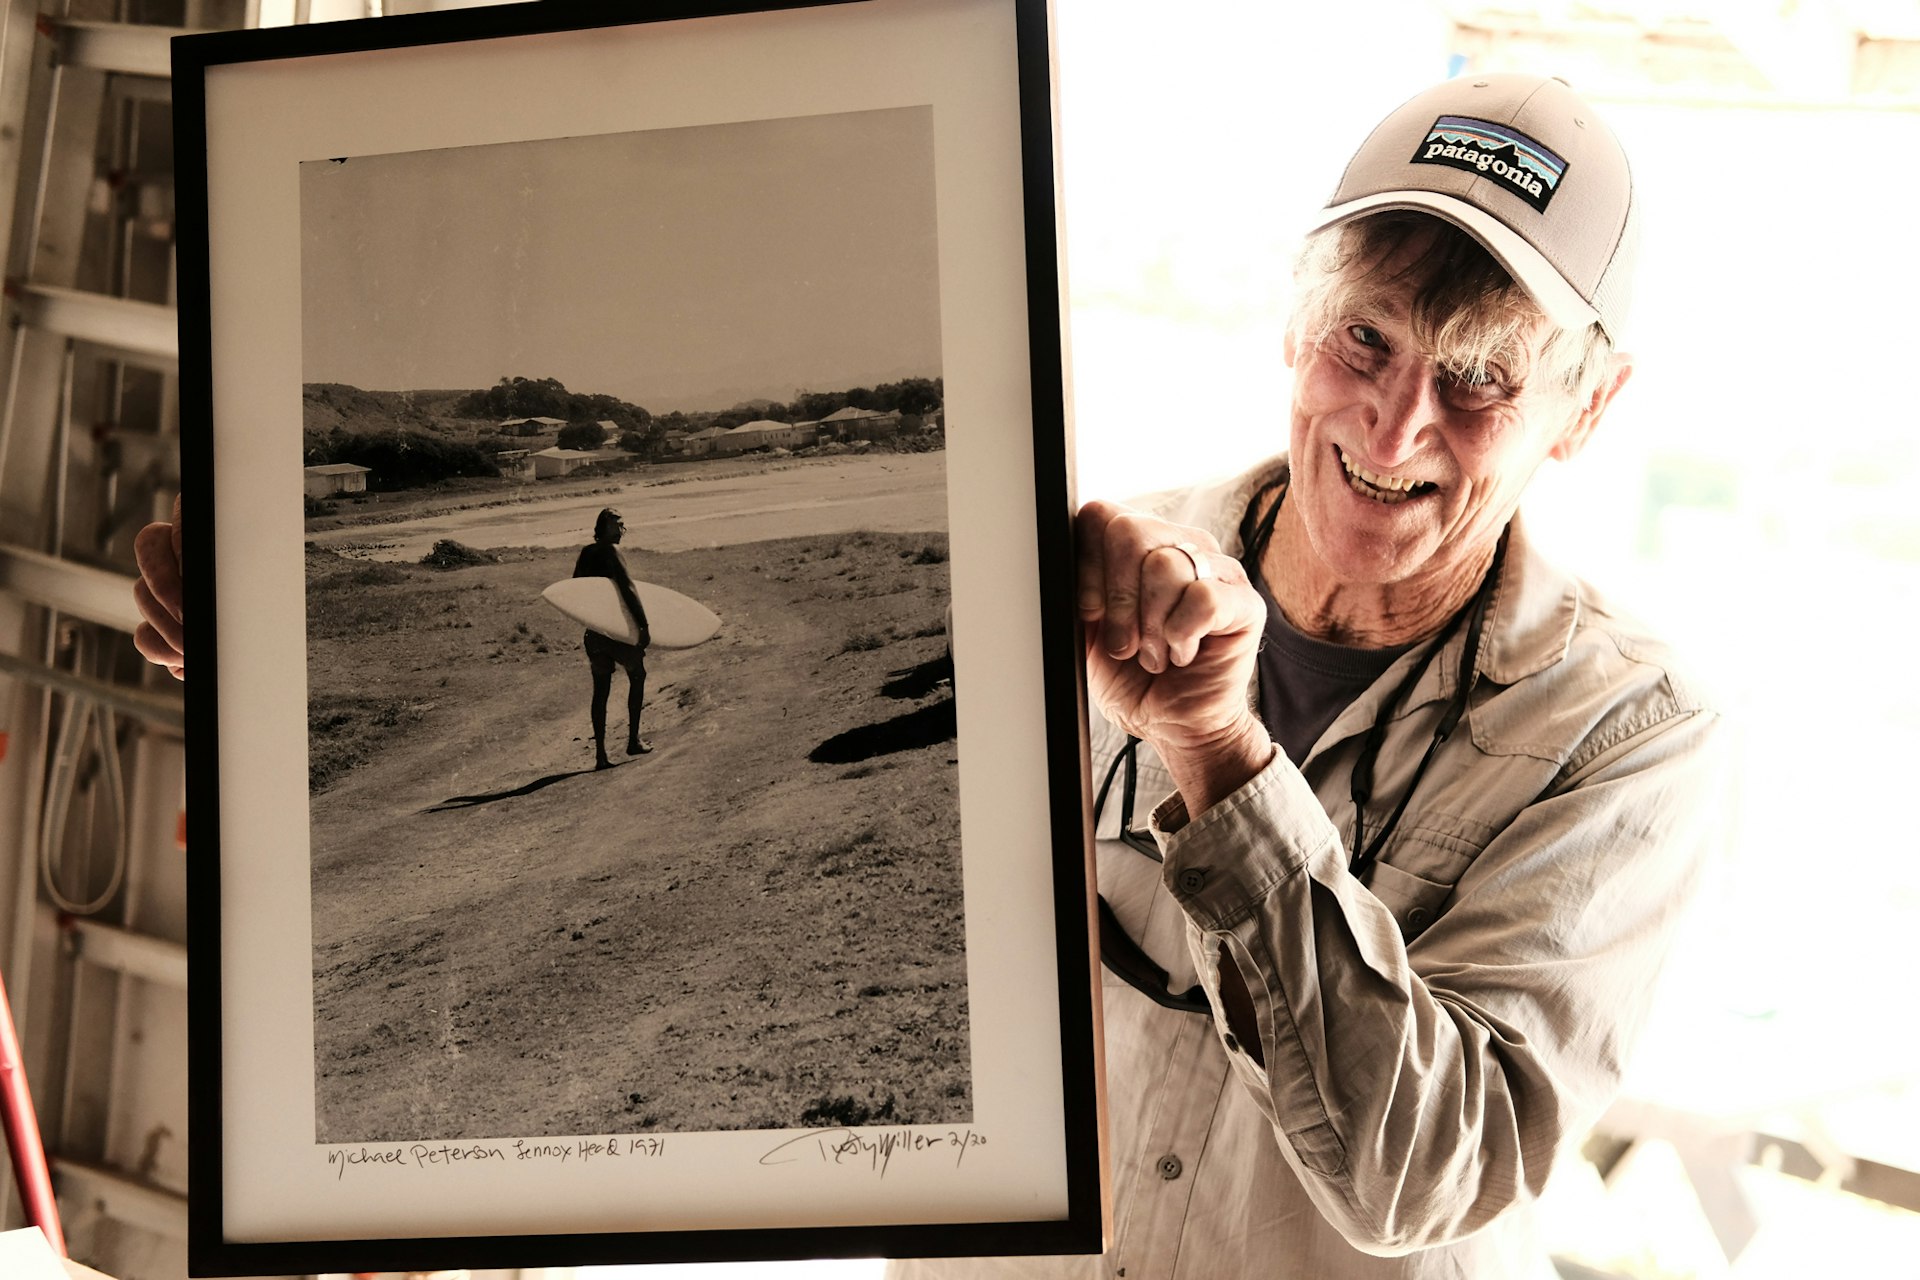 Surf legend Rusty Miller on the rise of Donald Trump